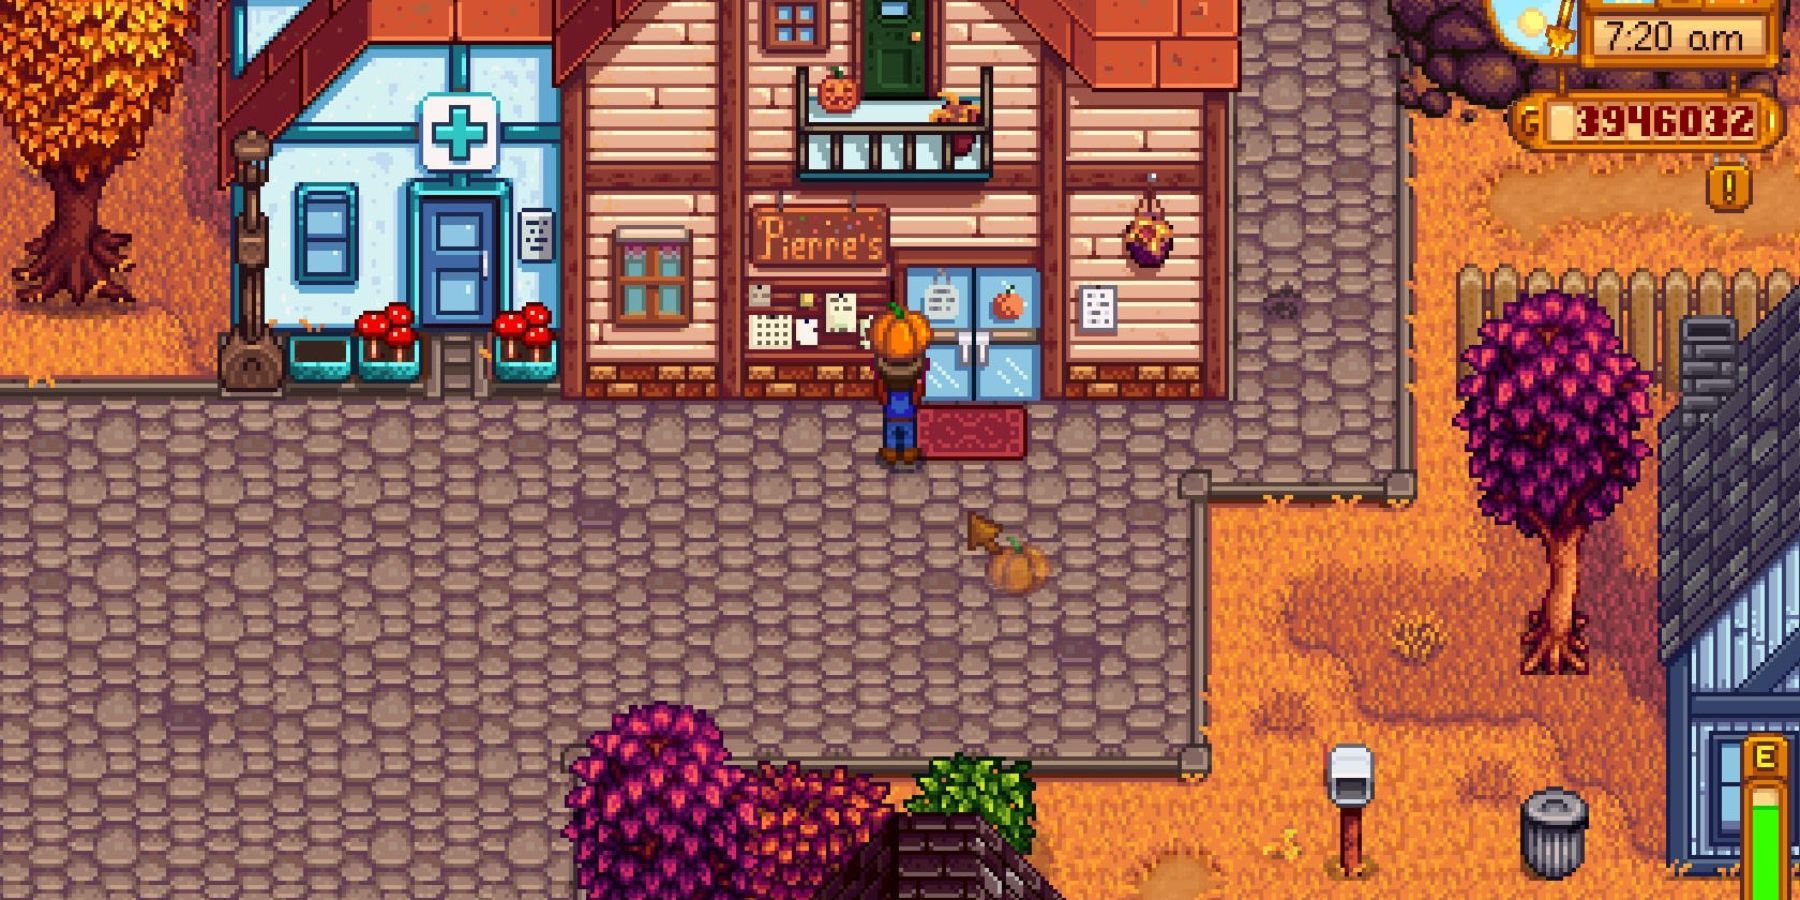 _stardew valley character holding pumpkin outside pierre's general store